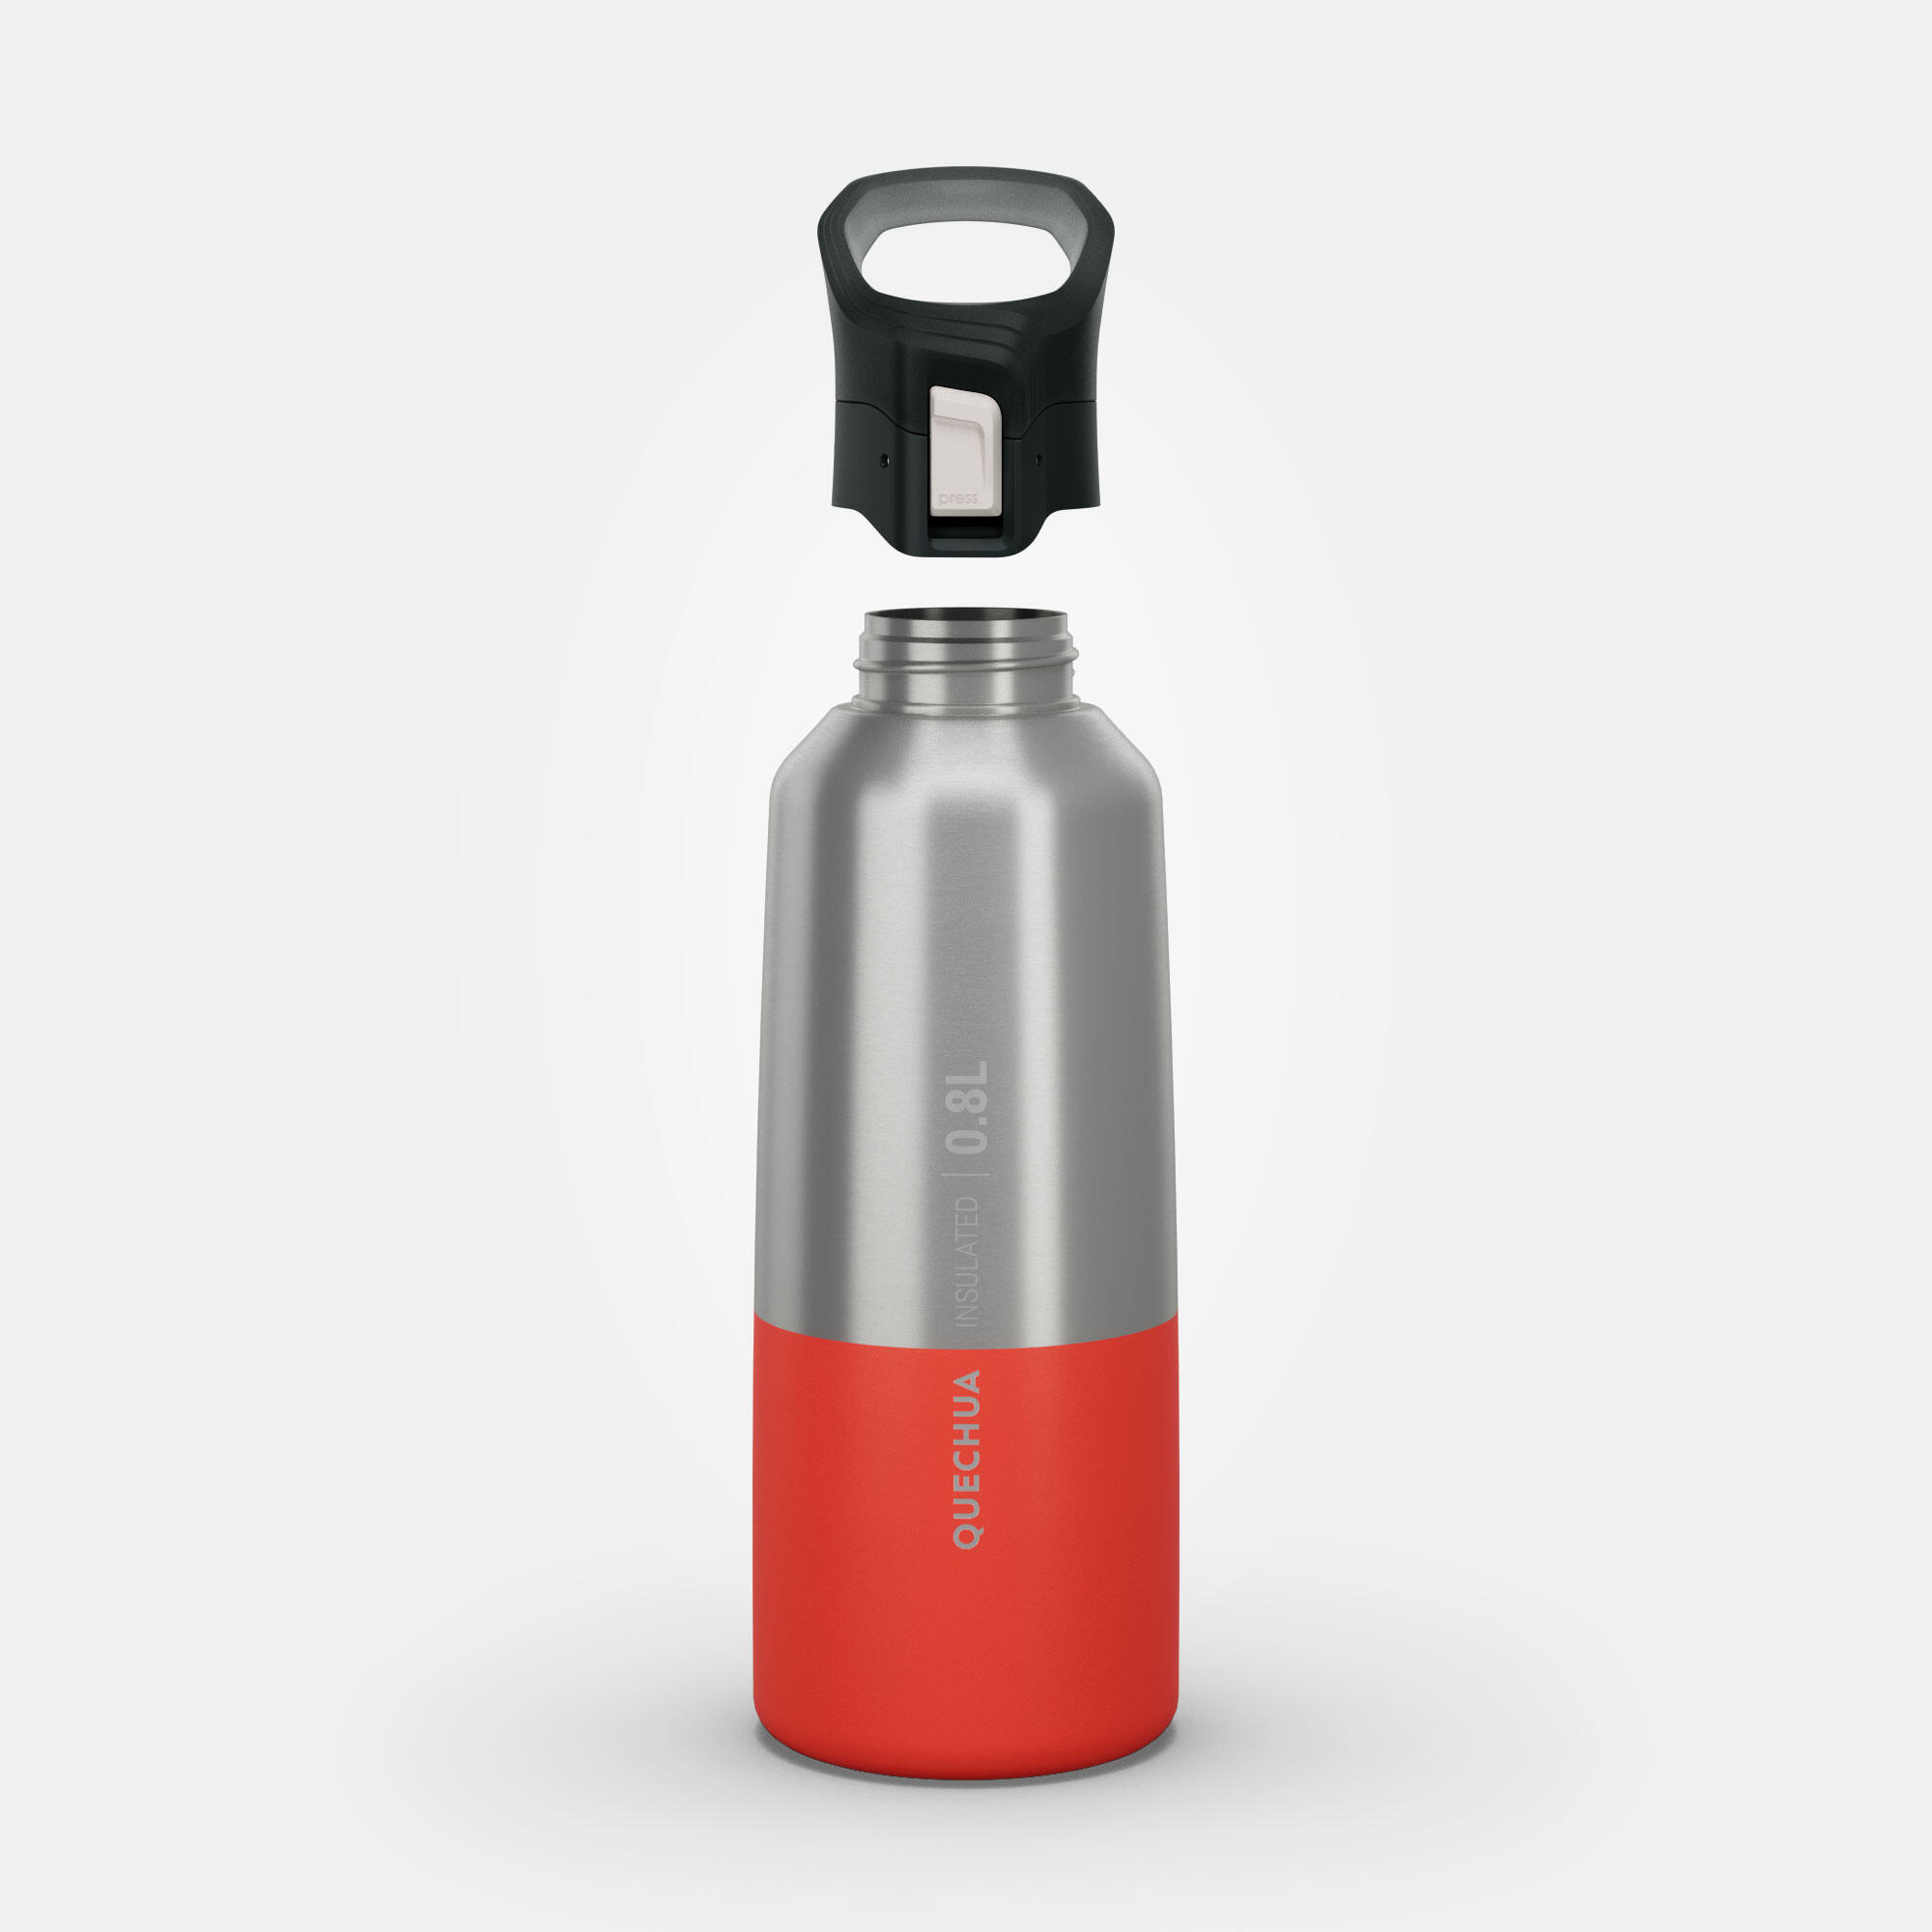 0.8 L stainless steel water bottle with quick-open cap for hiking - Red 2/35